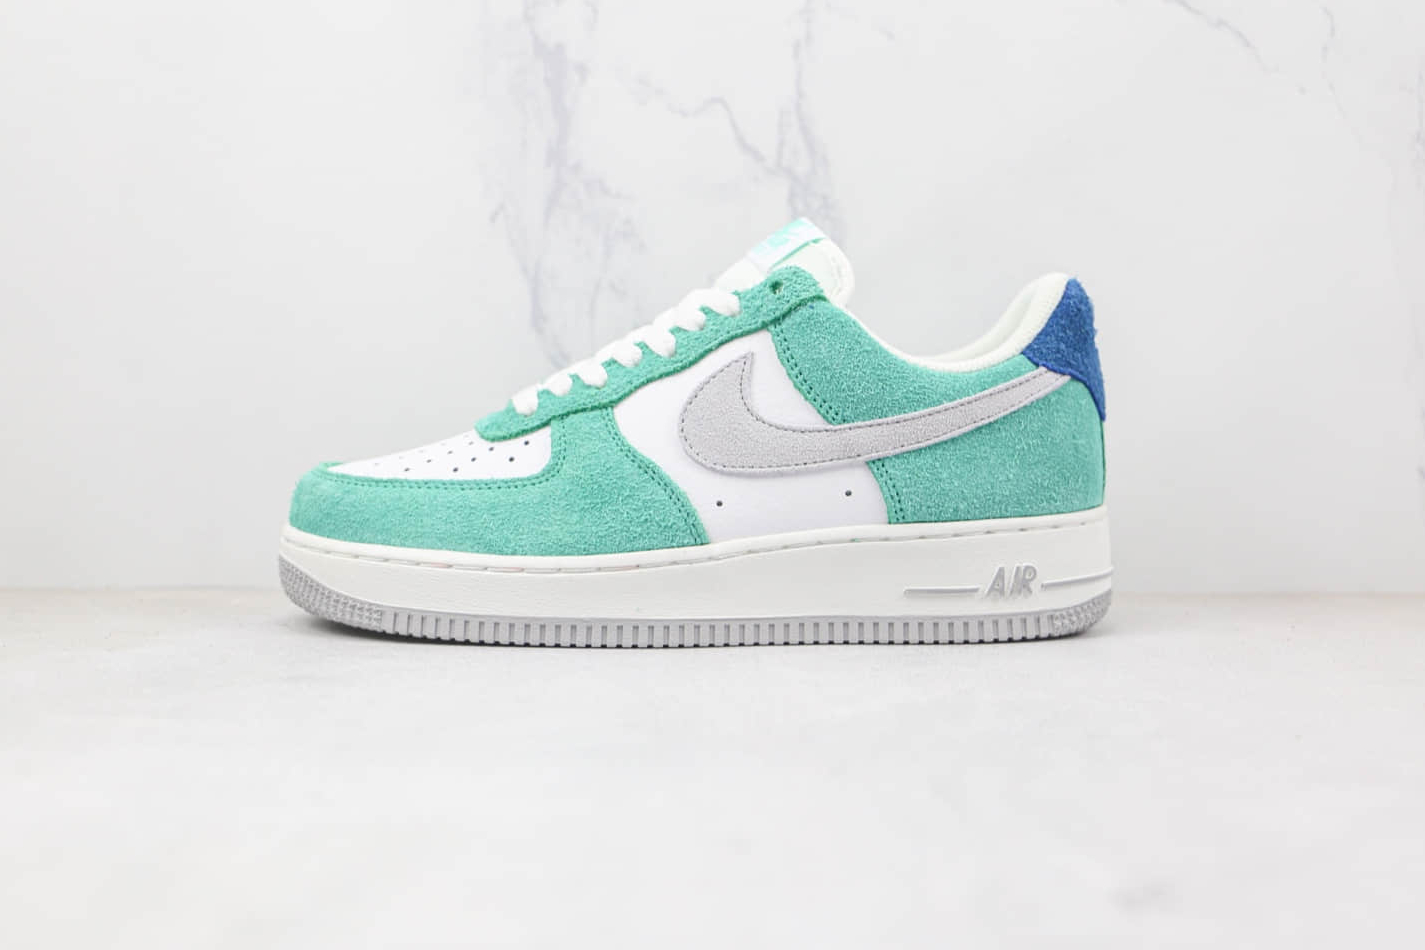 Nike Air Force 1 07 Low White Light Green Suede BQ8988-102 - Premium Sneakers for Style and Comfort!